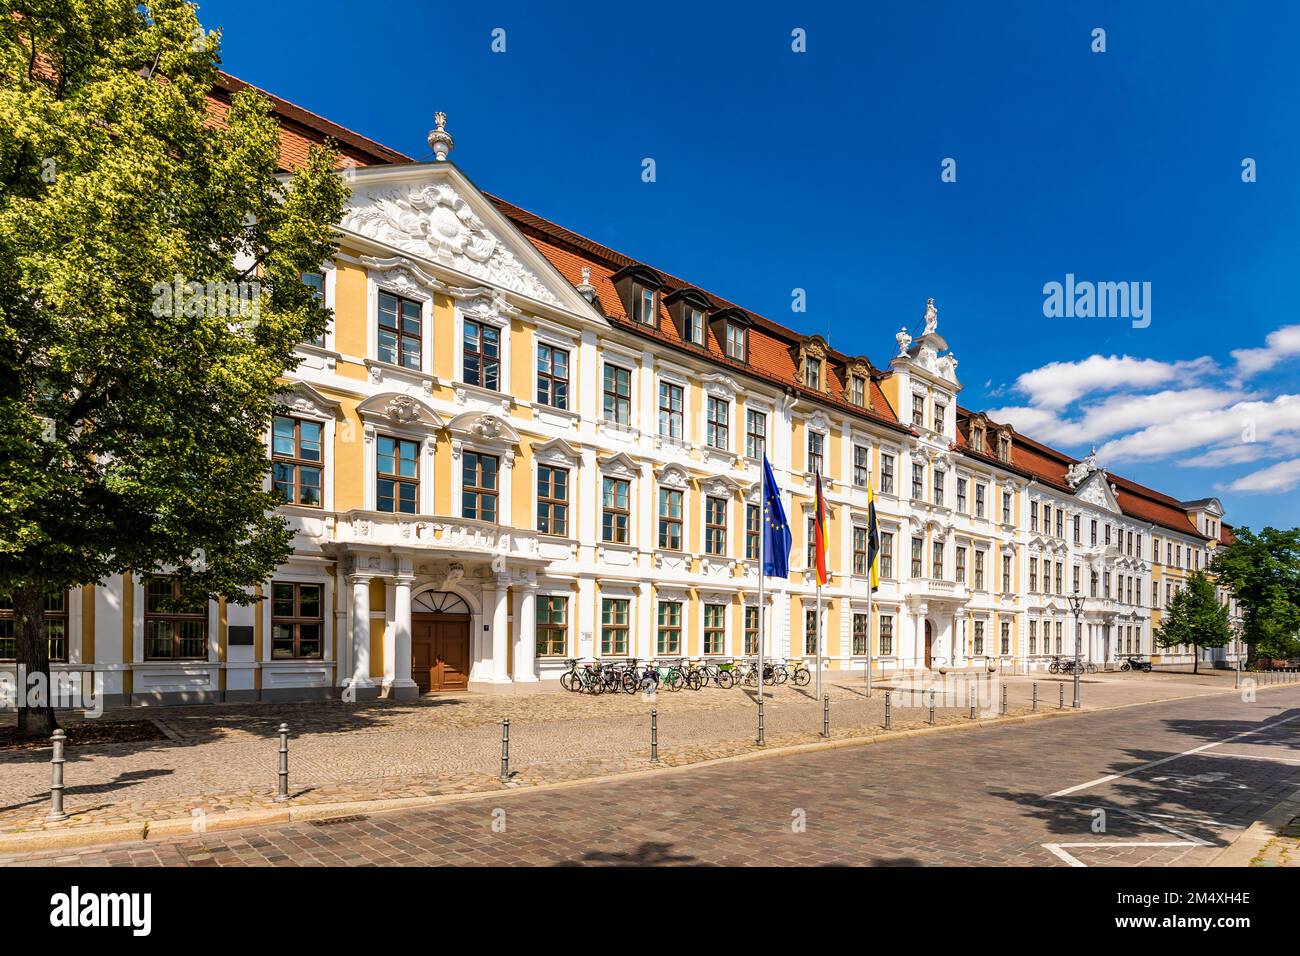 Germany, Saxony-Anhalt, Magdeburg, Facade of parliament building Stock Photo